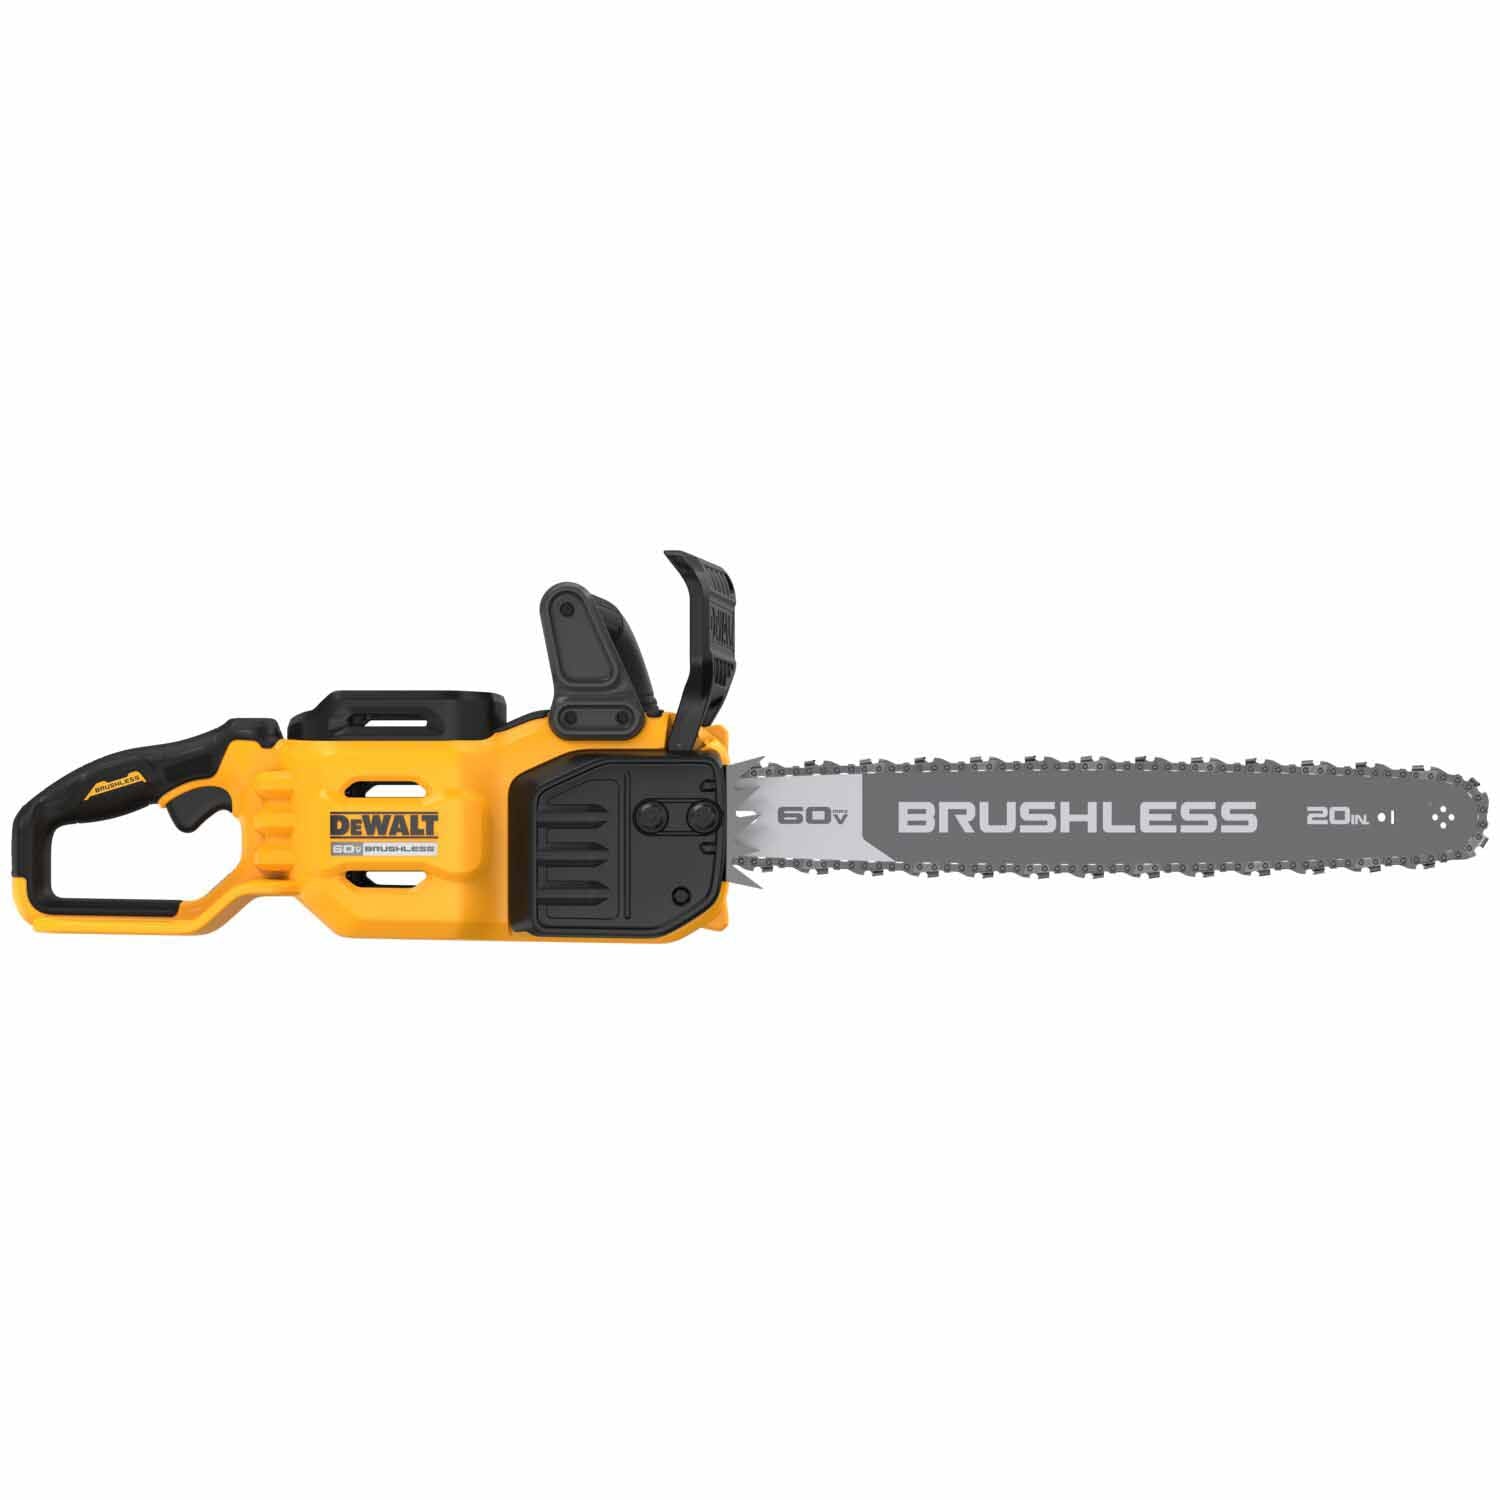 DeWalt DCCS677B 60V MAX* Brushless Cordless 20" Chainsaw, Tool Only